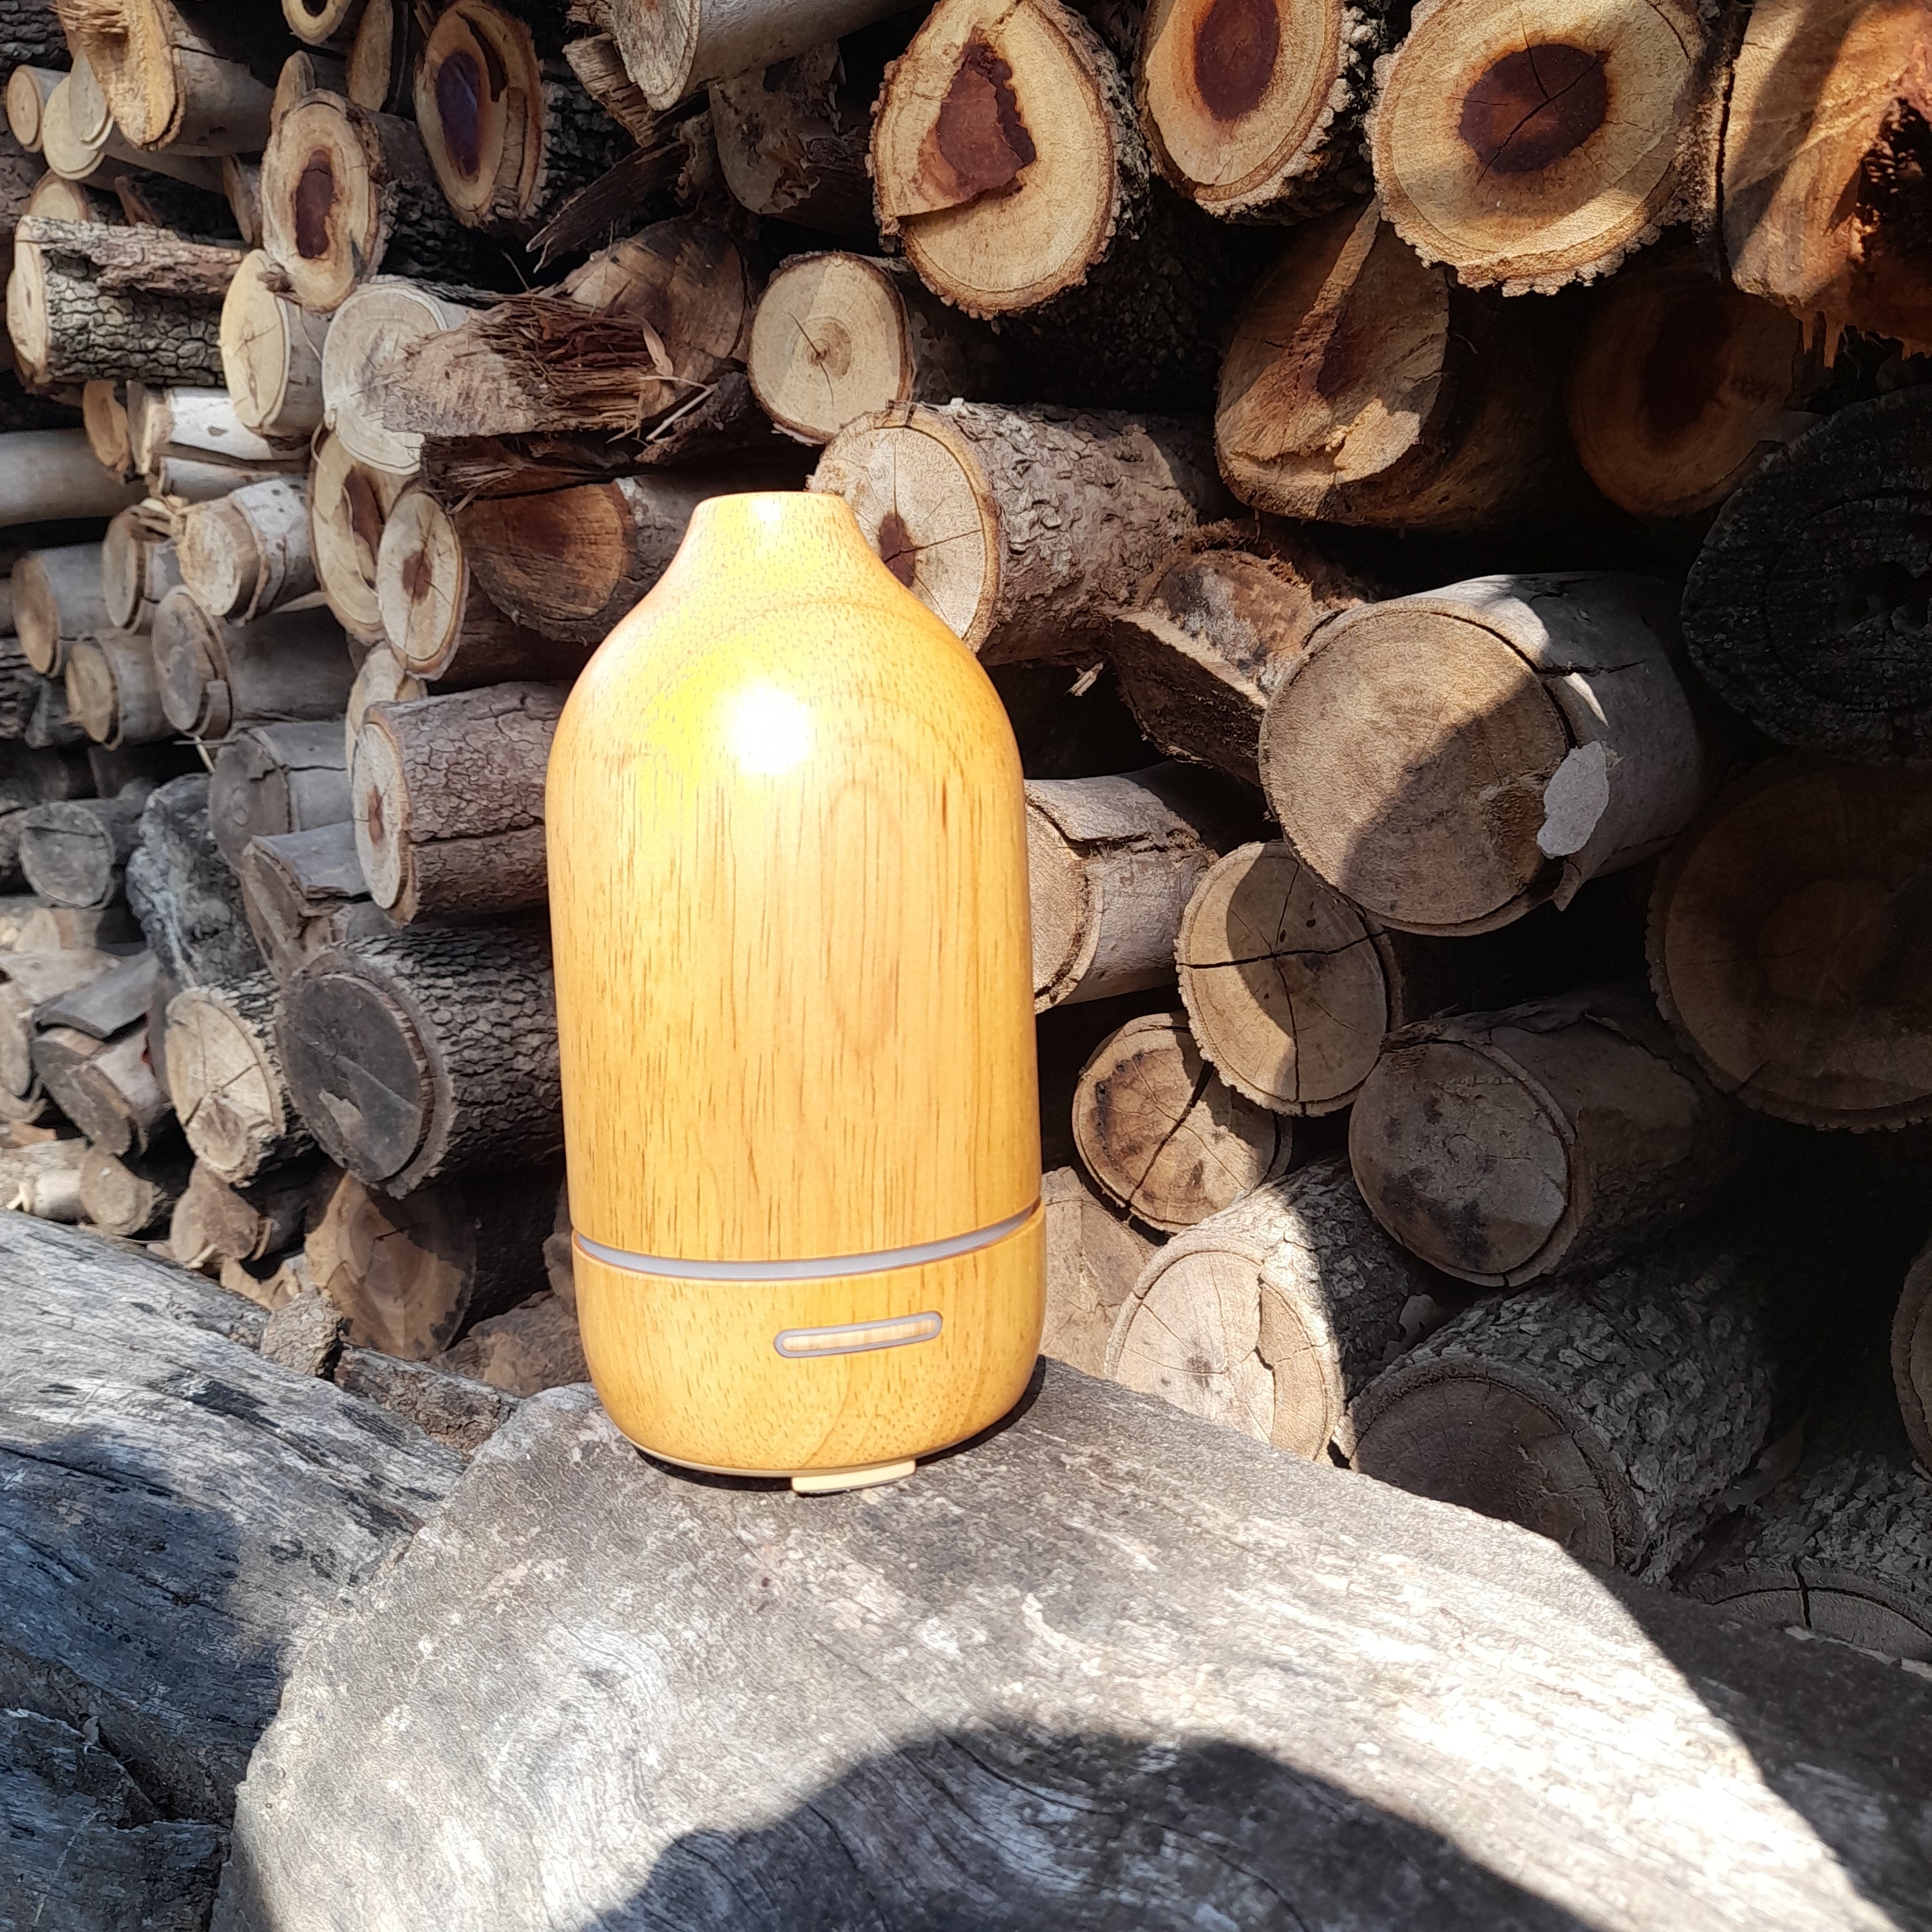 Wooden Aromatherapy Diffuser